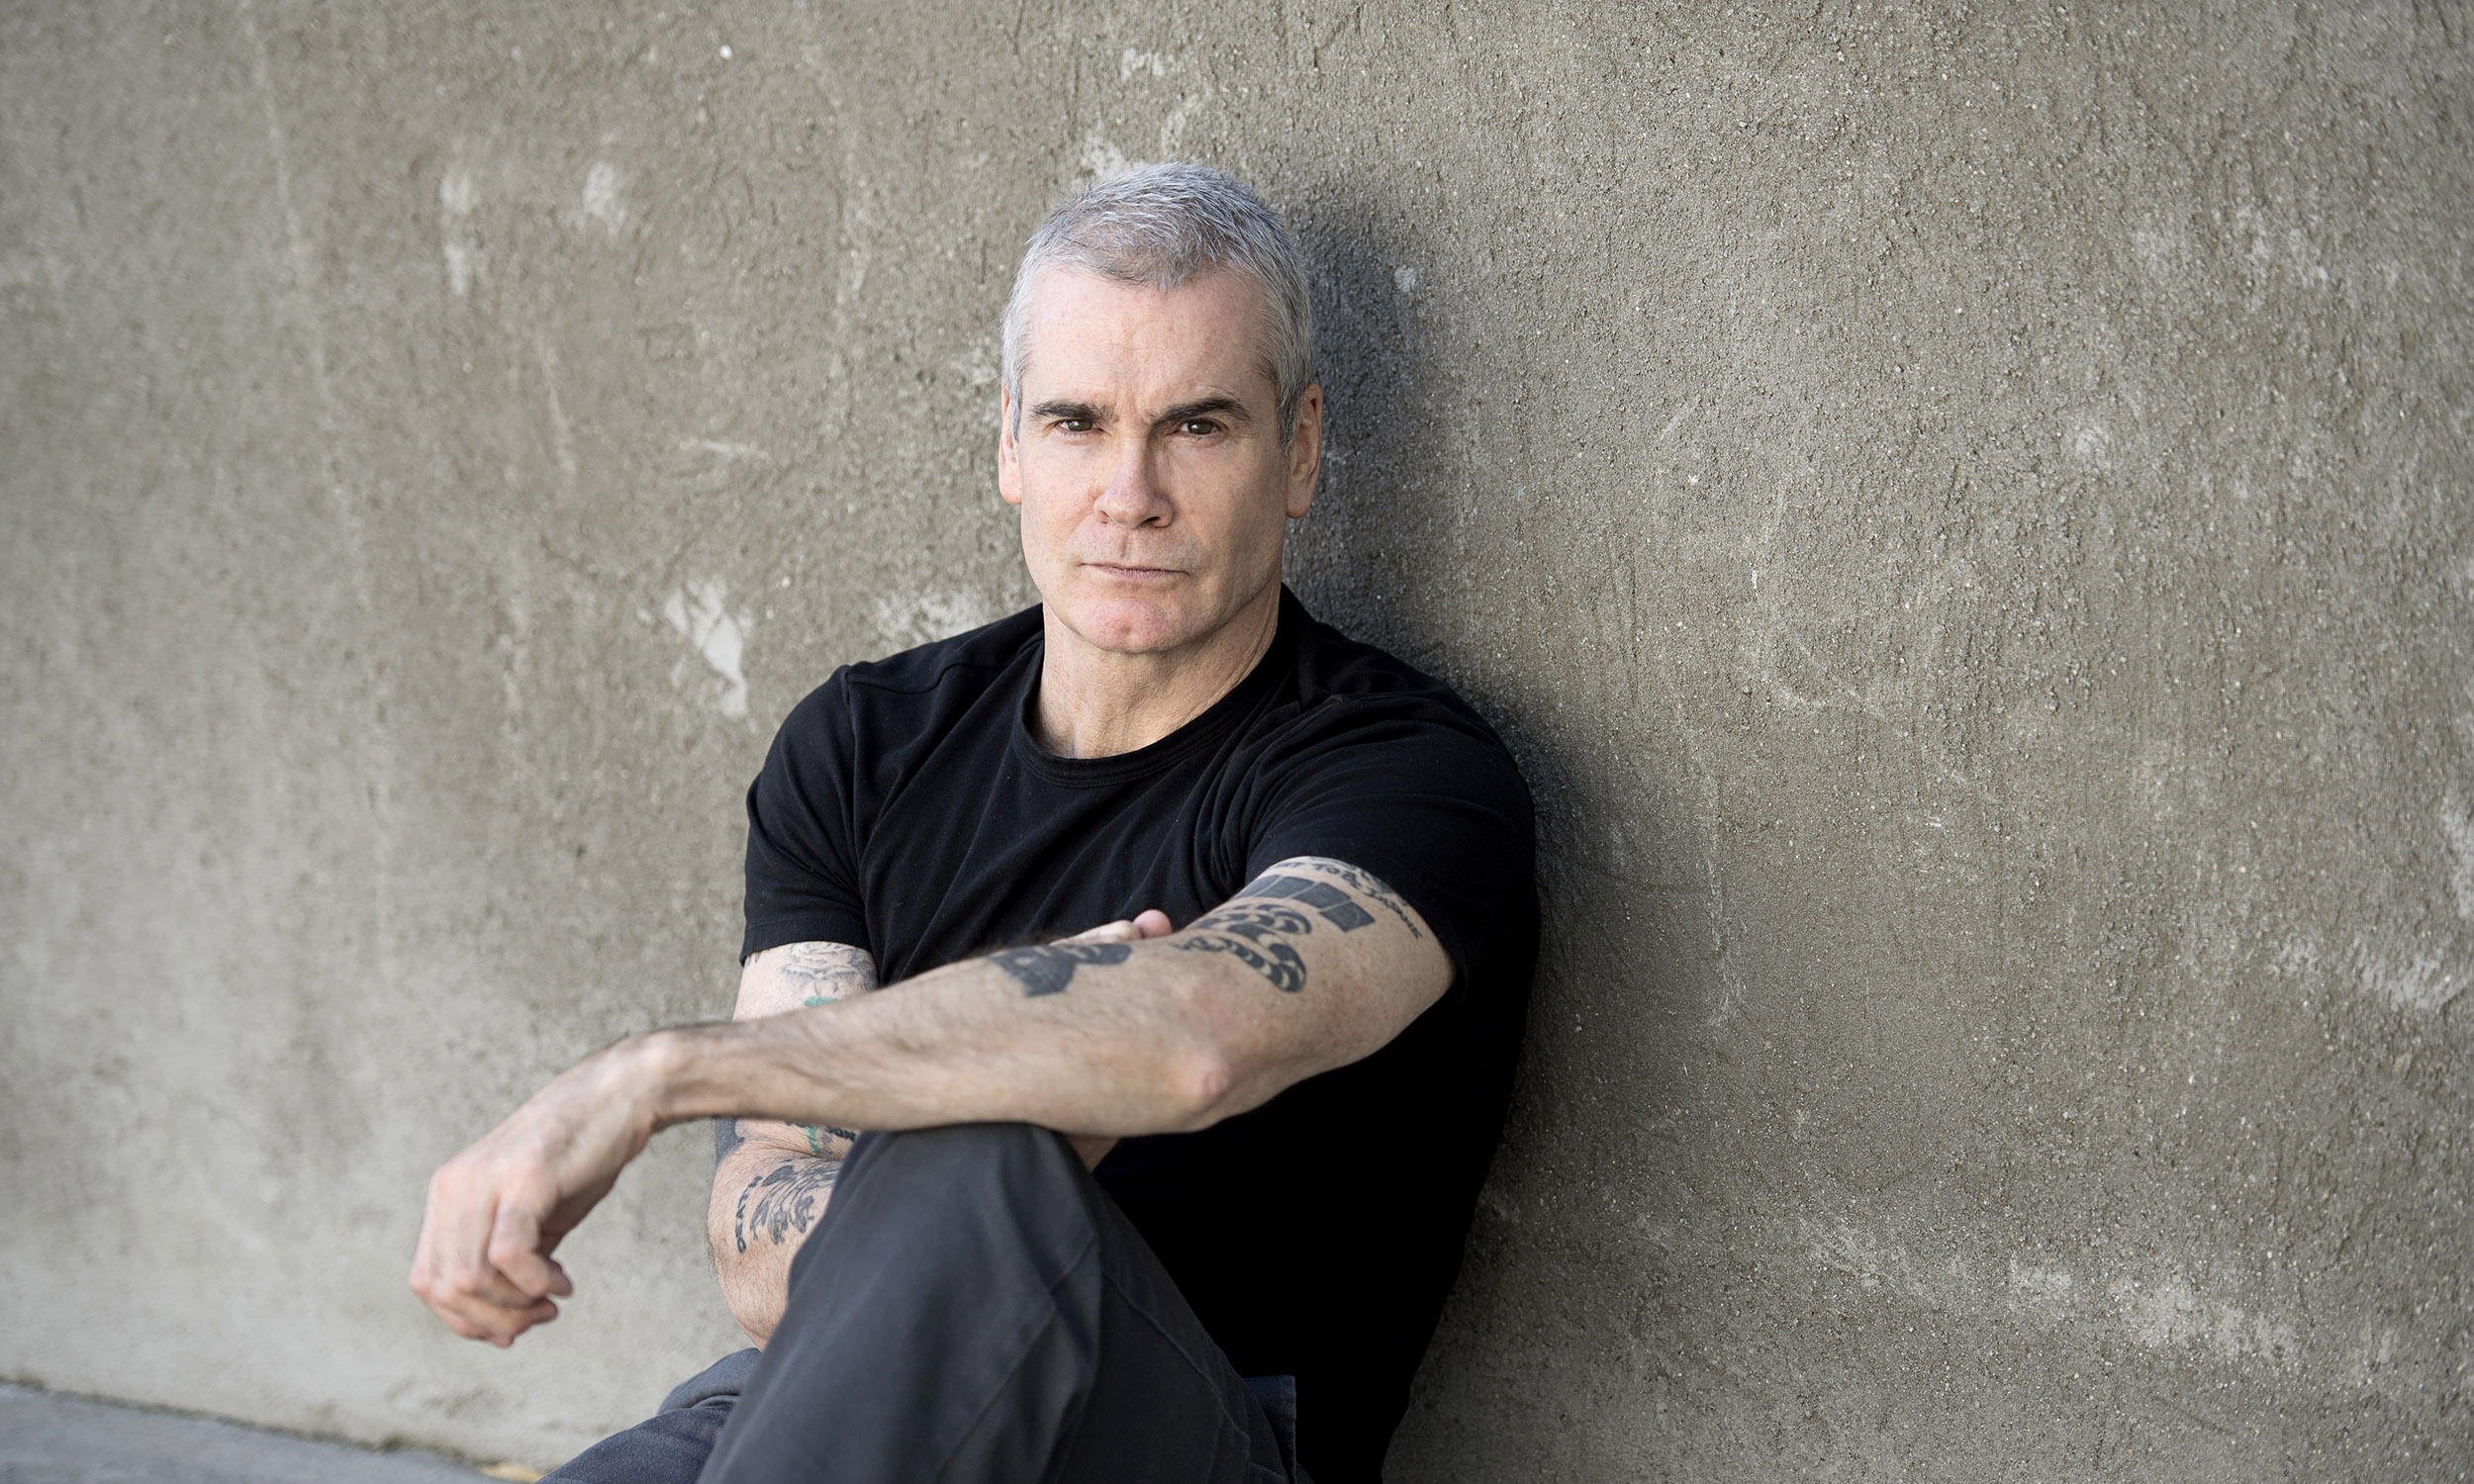 Henry Rollins on Alcohol Drugs and His Reagan Era Tattoos  Ep 5 33  ARTST TLK  Reserve Channel  YouTube